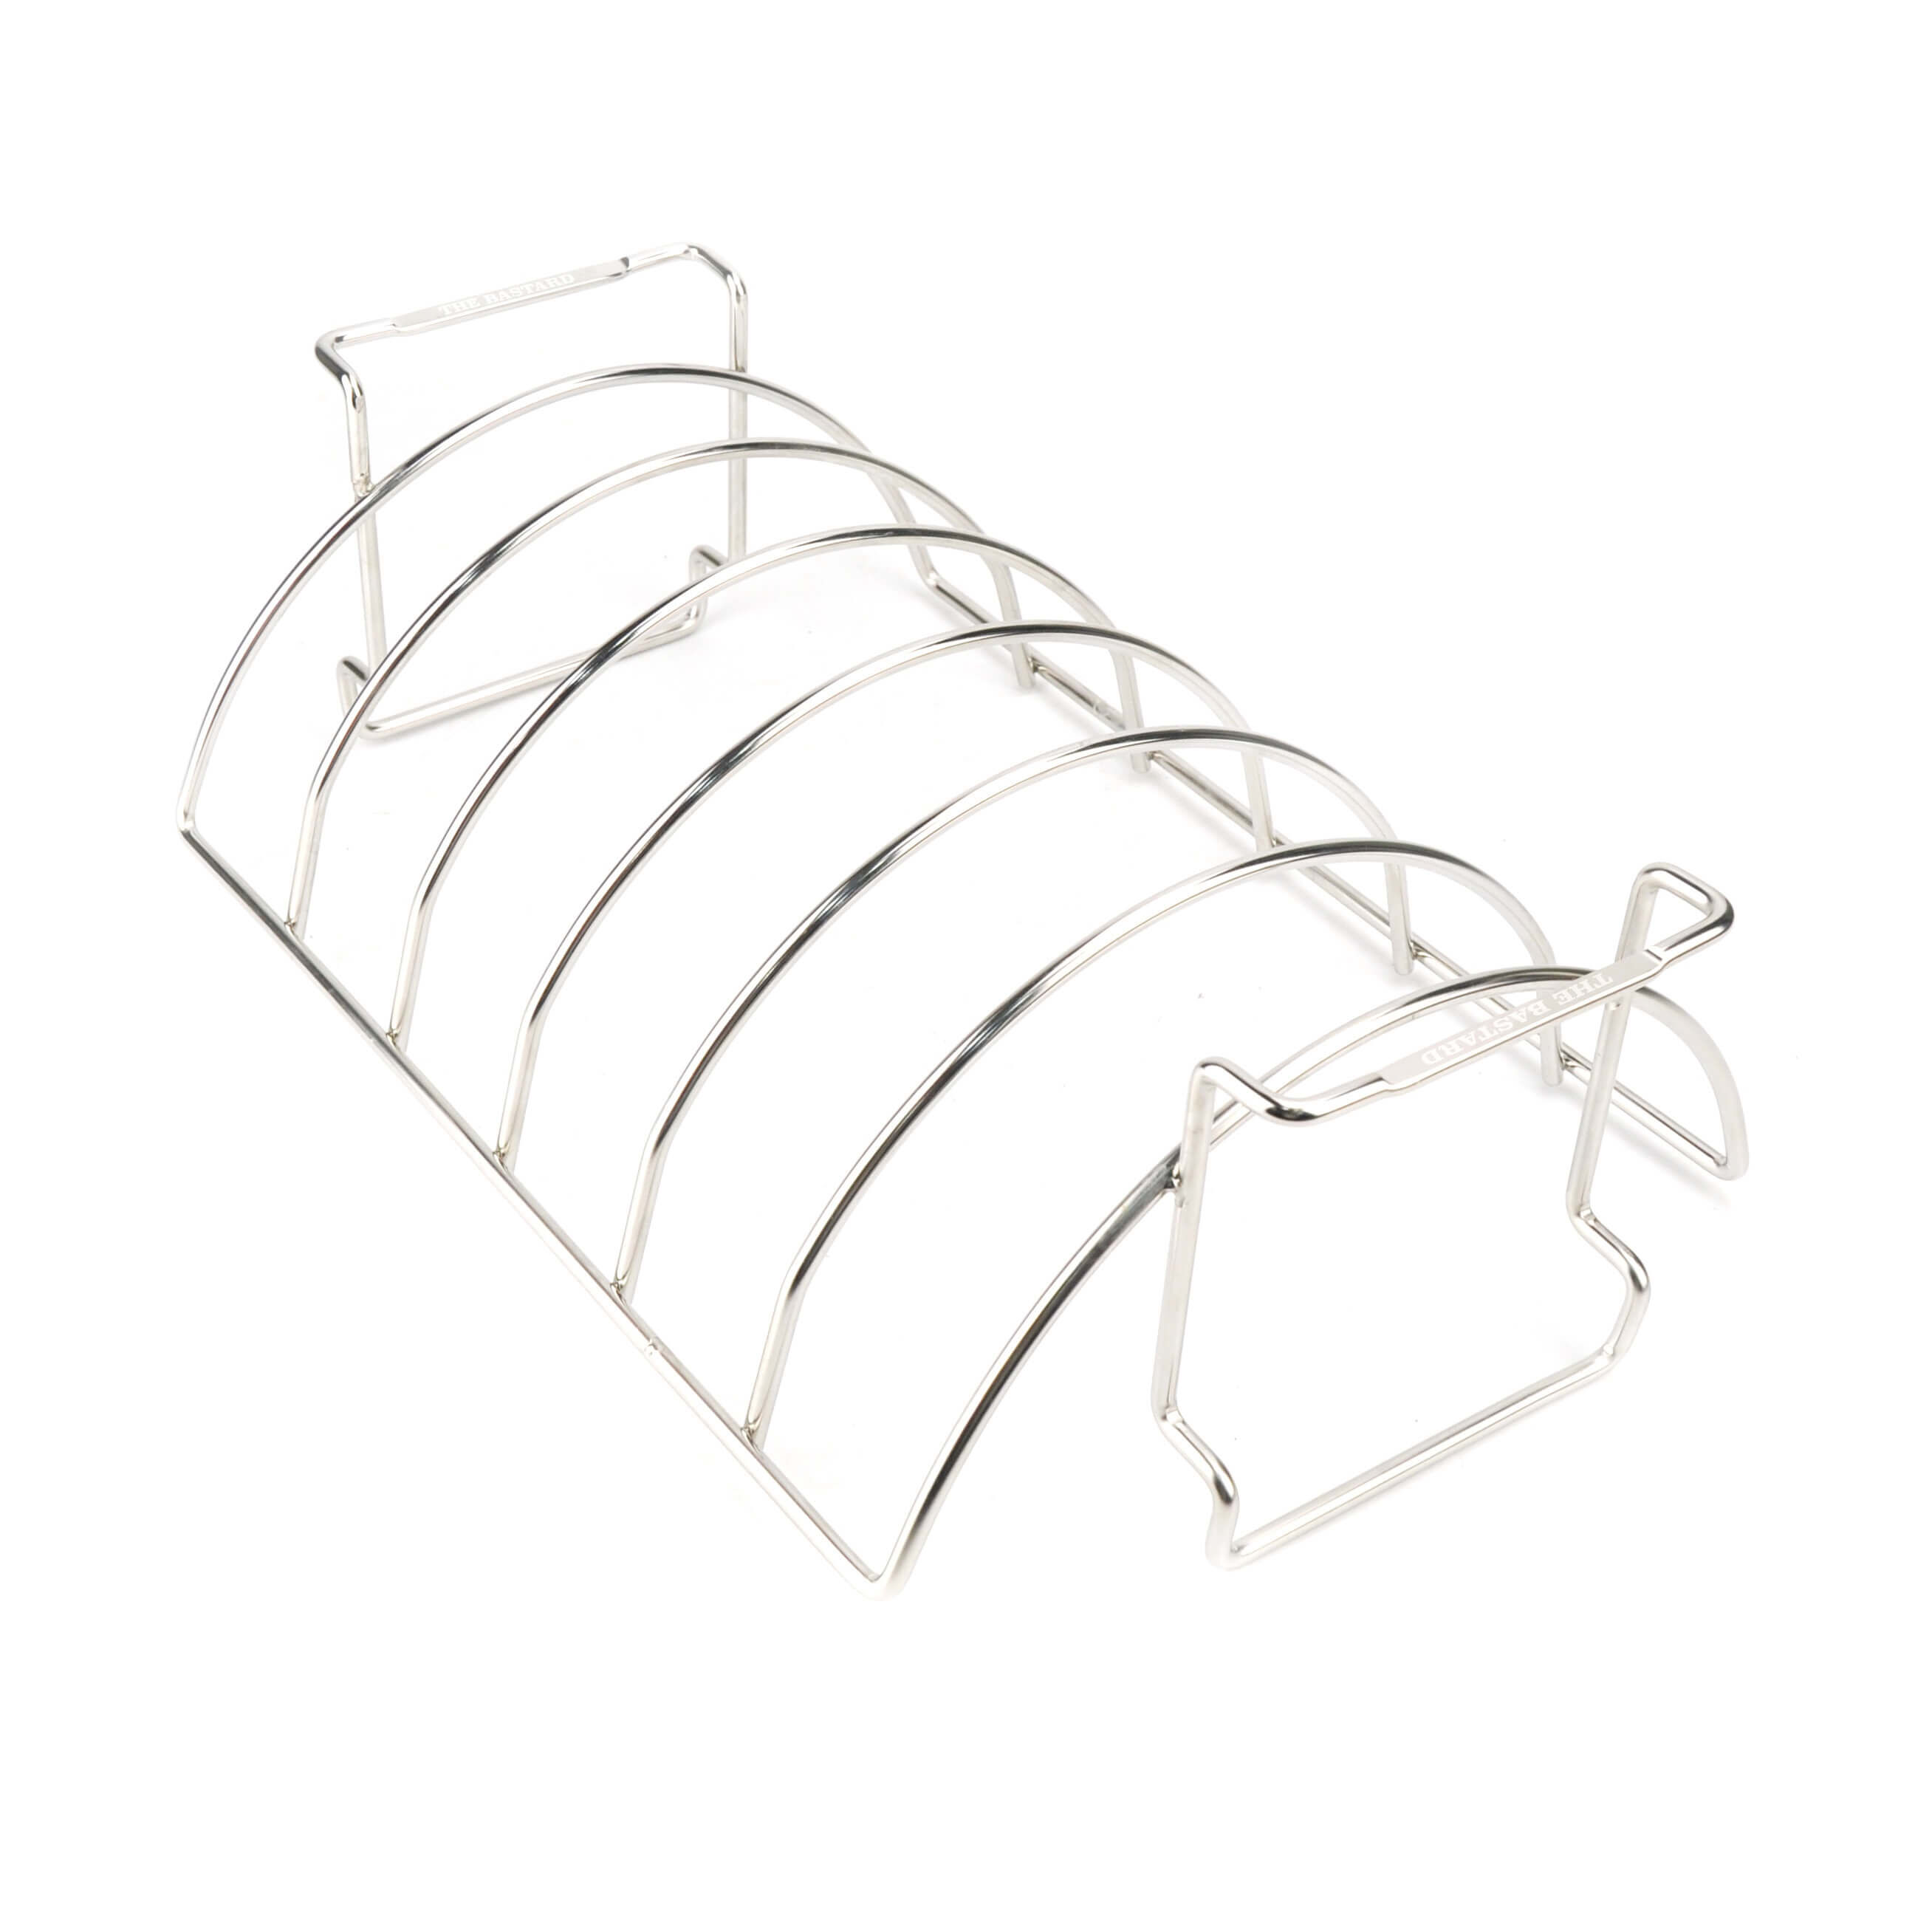 The Bastard Spare Rib Rack Deluxe Large BB025